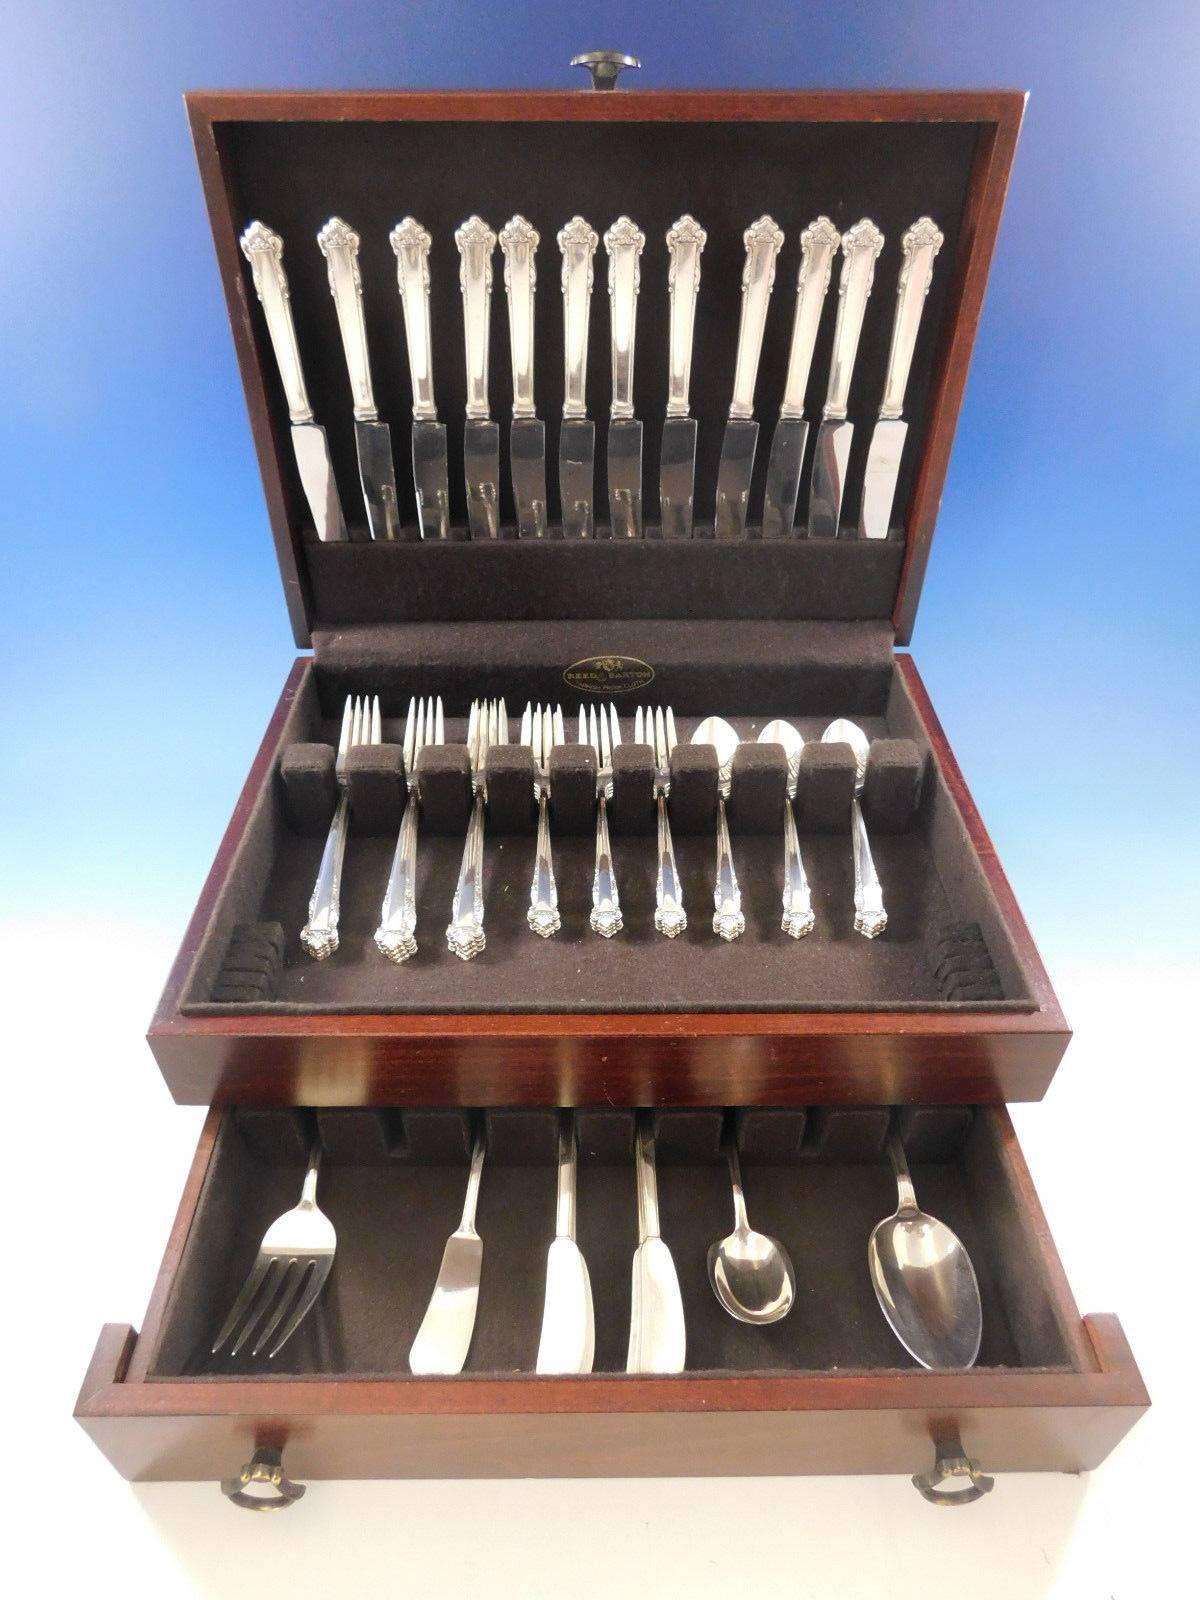 English shell by Lunt sterling silver flatware set, 64 pieces. This set includes:

12 knives, 8 7/8